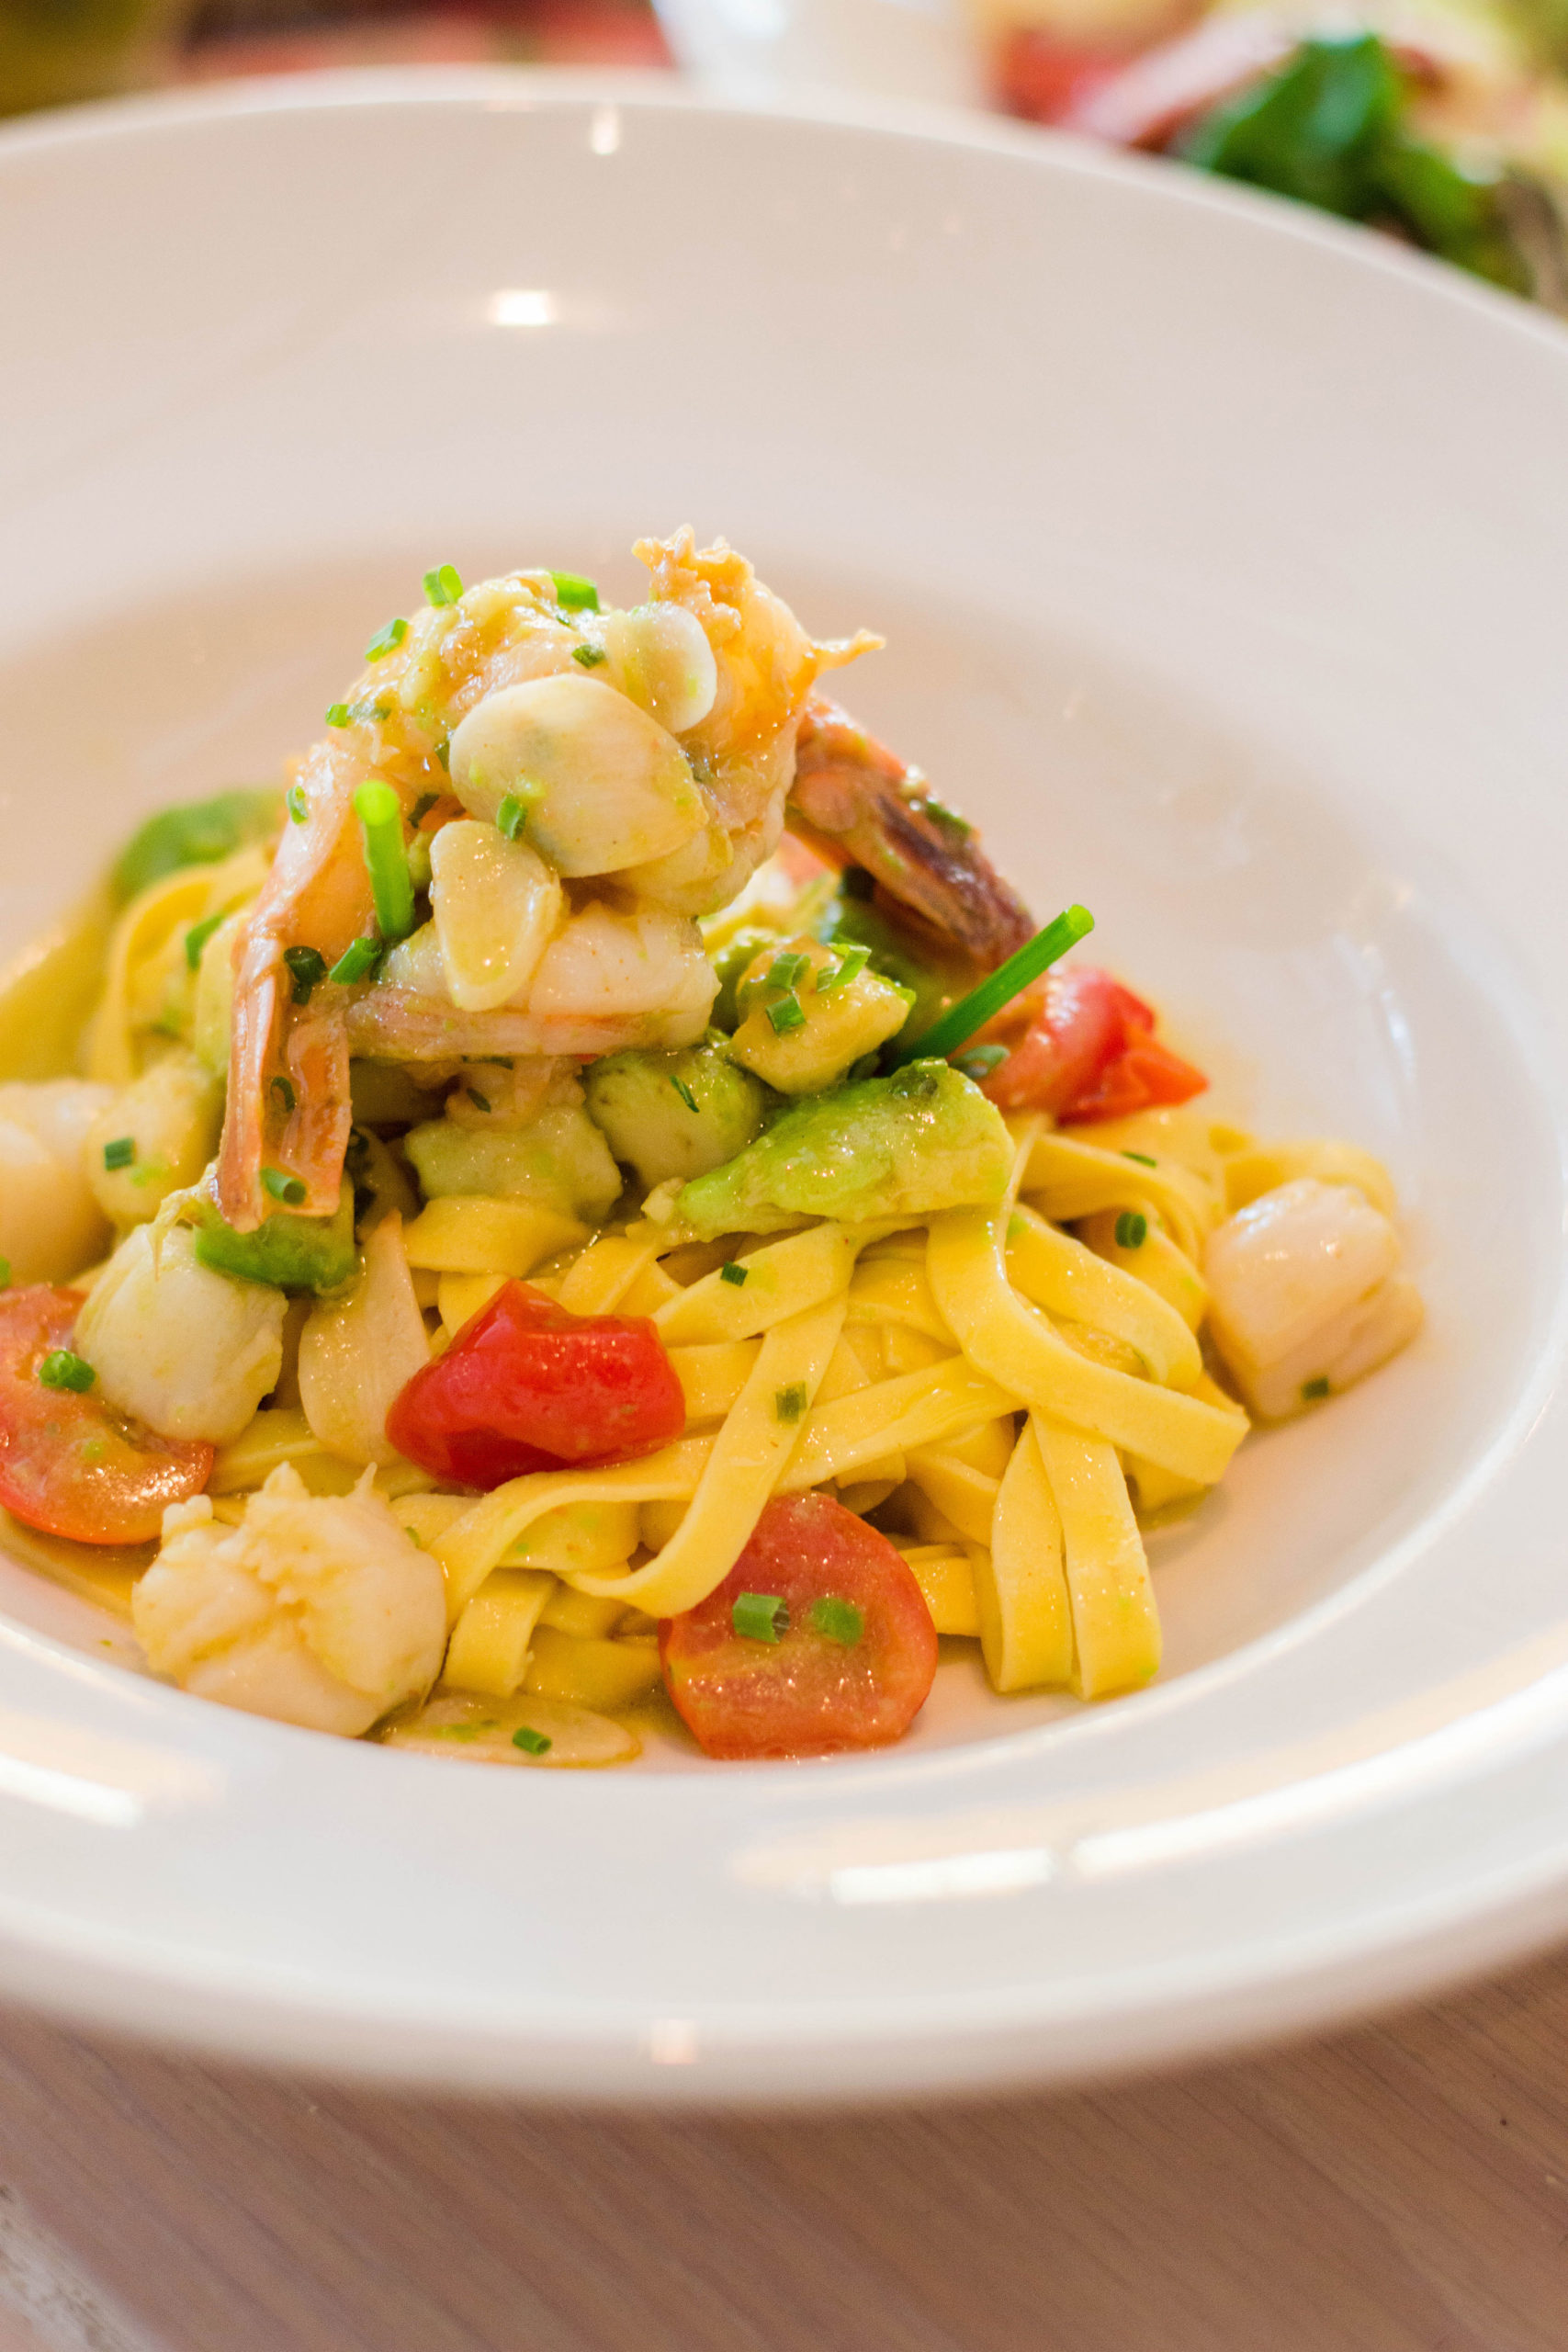 You can find Caffe Milano on 5th Avenue in Naples, Florida - a street that's bursting at the seams with great shopping and super impressive restaurants. Caffe Milano offers a diverse Italian menu that'll get your taste buds going - every. single. time. #naplesflorida